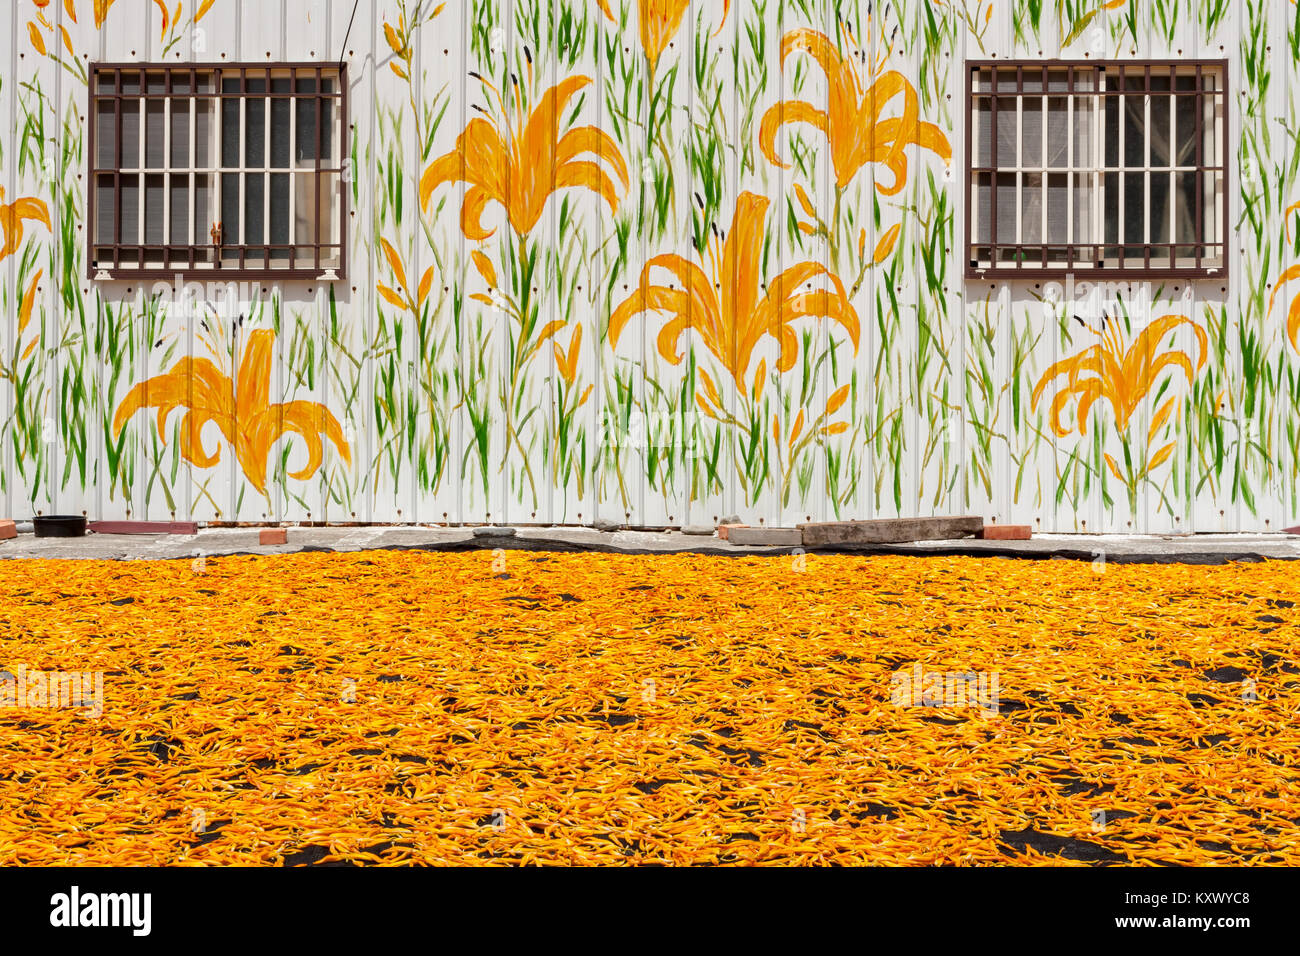 Dried edible orange daylily (Hemerocallis sp.), aka golden needles, flowers bud drying process in the sun, wall painted house on background, Taiwan Stock Photo